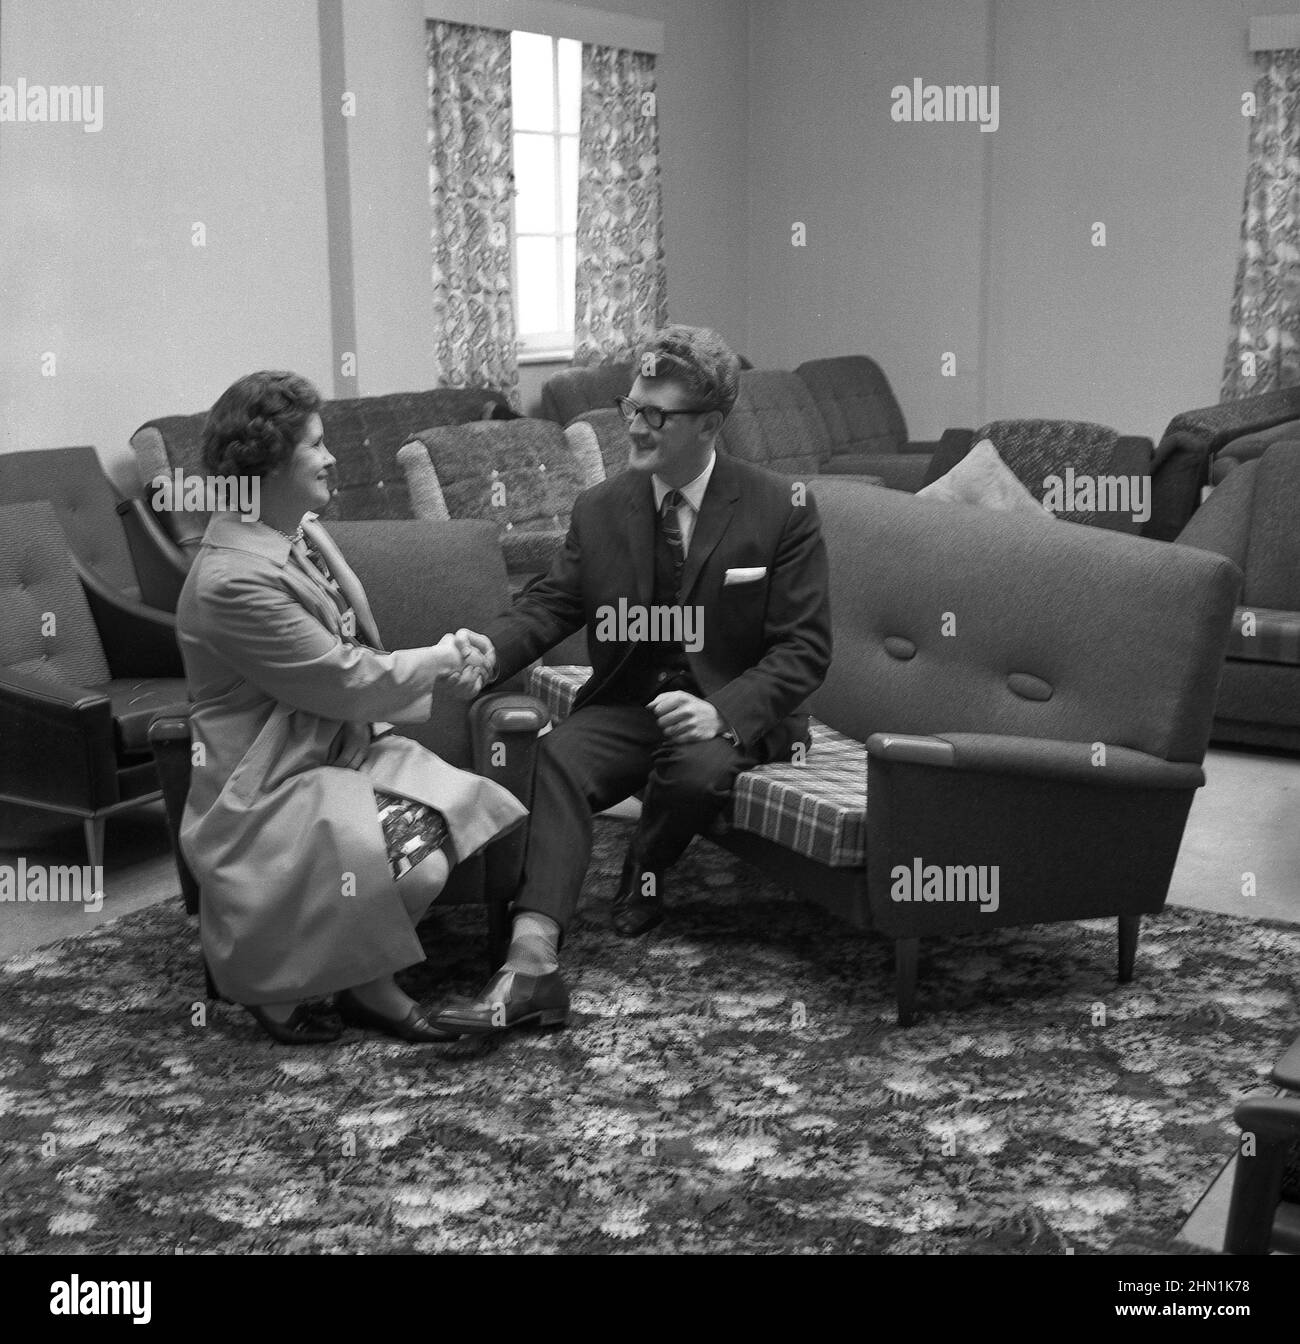 1960s, historical, inside a furniture shop, a lady shaking the hands of a suited salesman for his help after buying a new settee and lounge chairs, known as a 'three piece suite'. Stock Photo